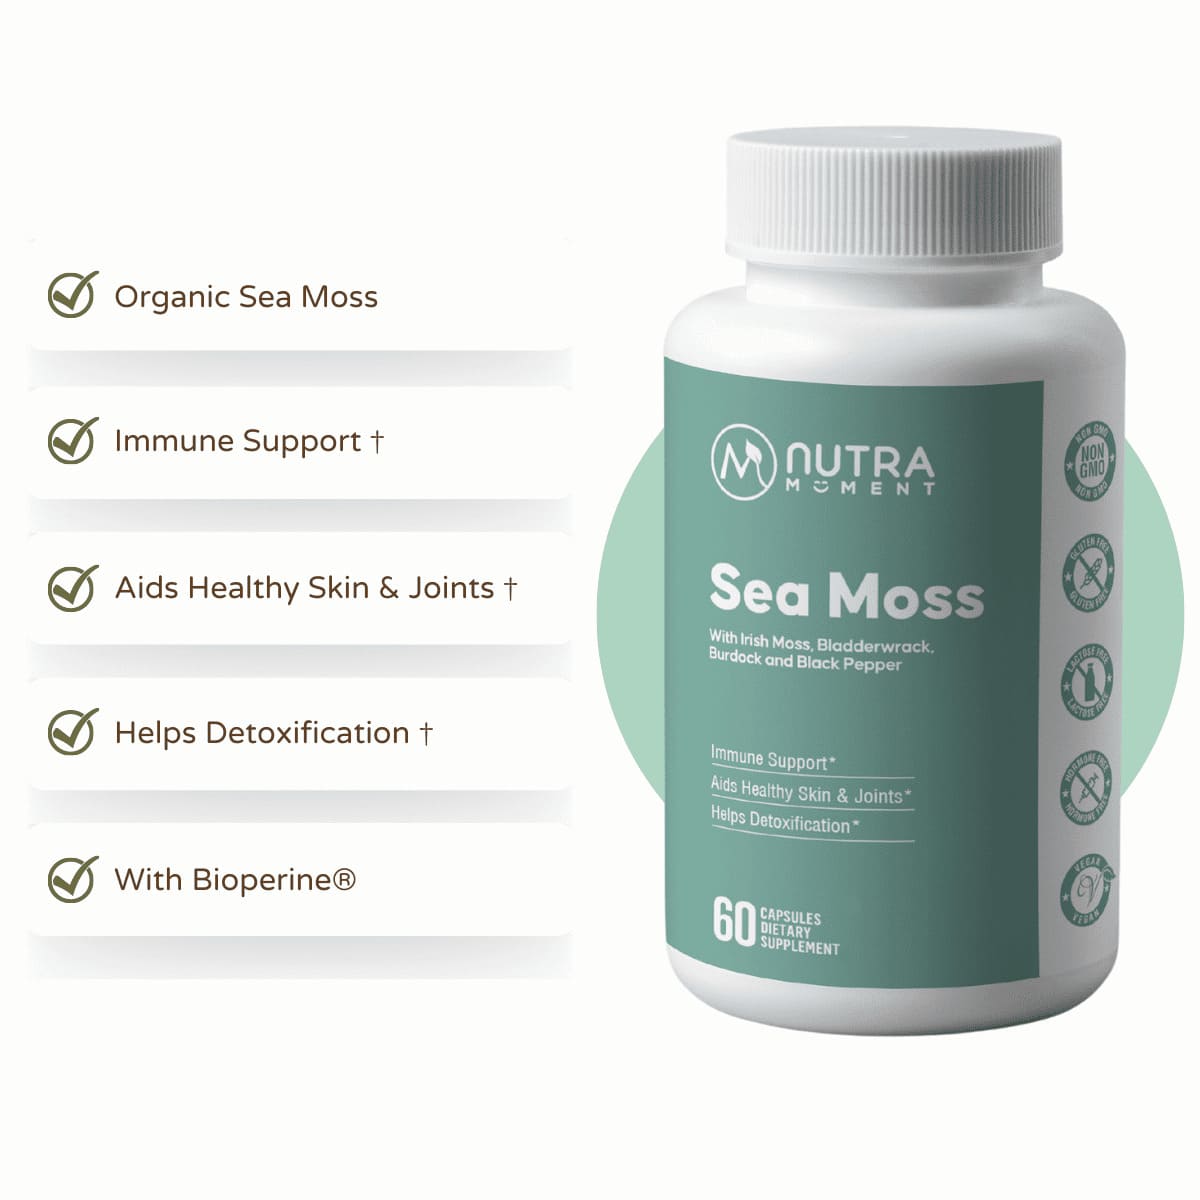 Nutra Moment | Organic Sea Moss | Product Highlights & Benefits